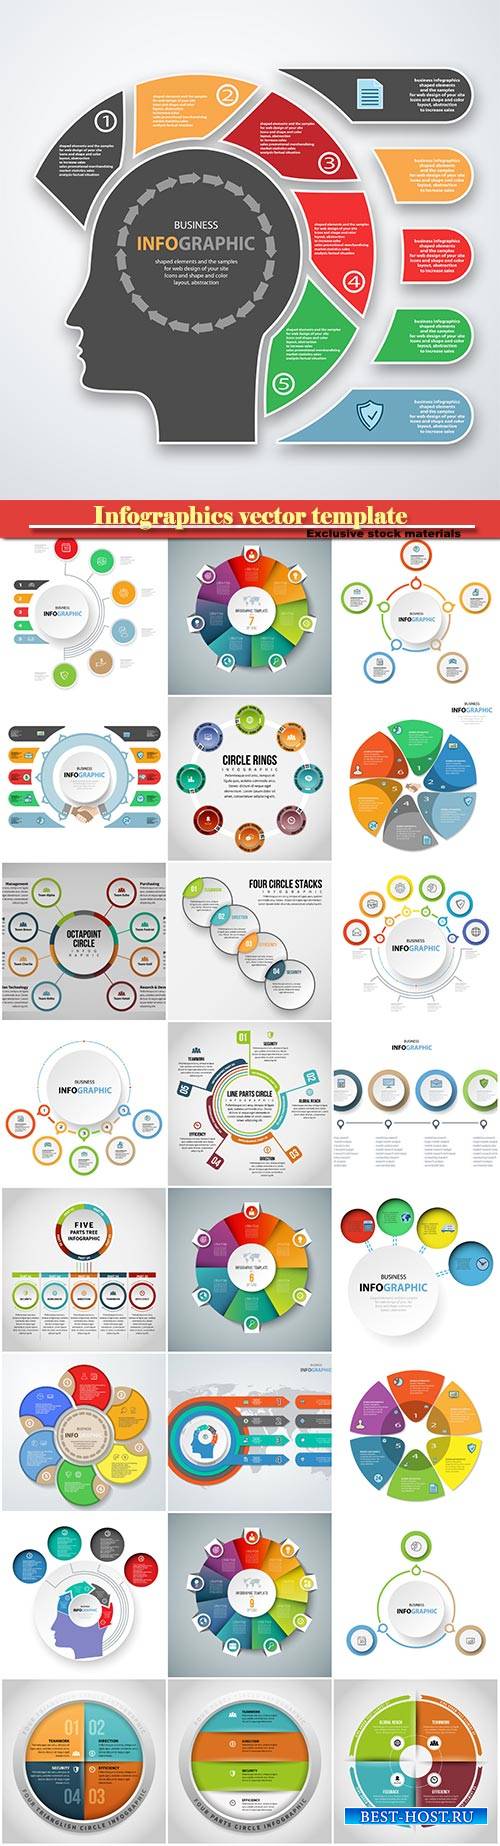 Infographics vector template for business presentations or information banner #2